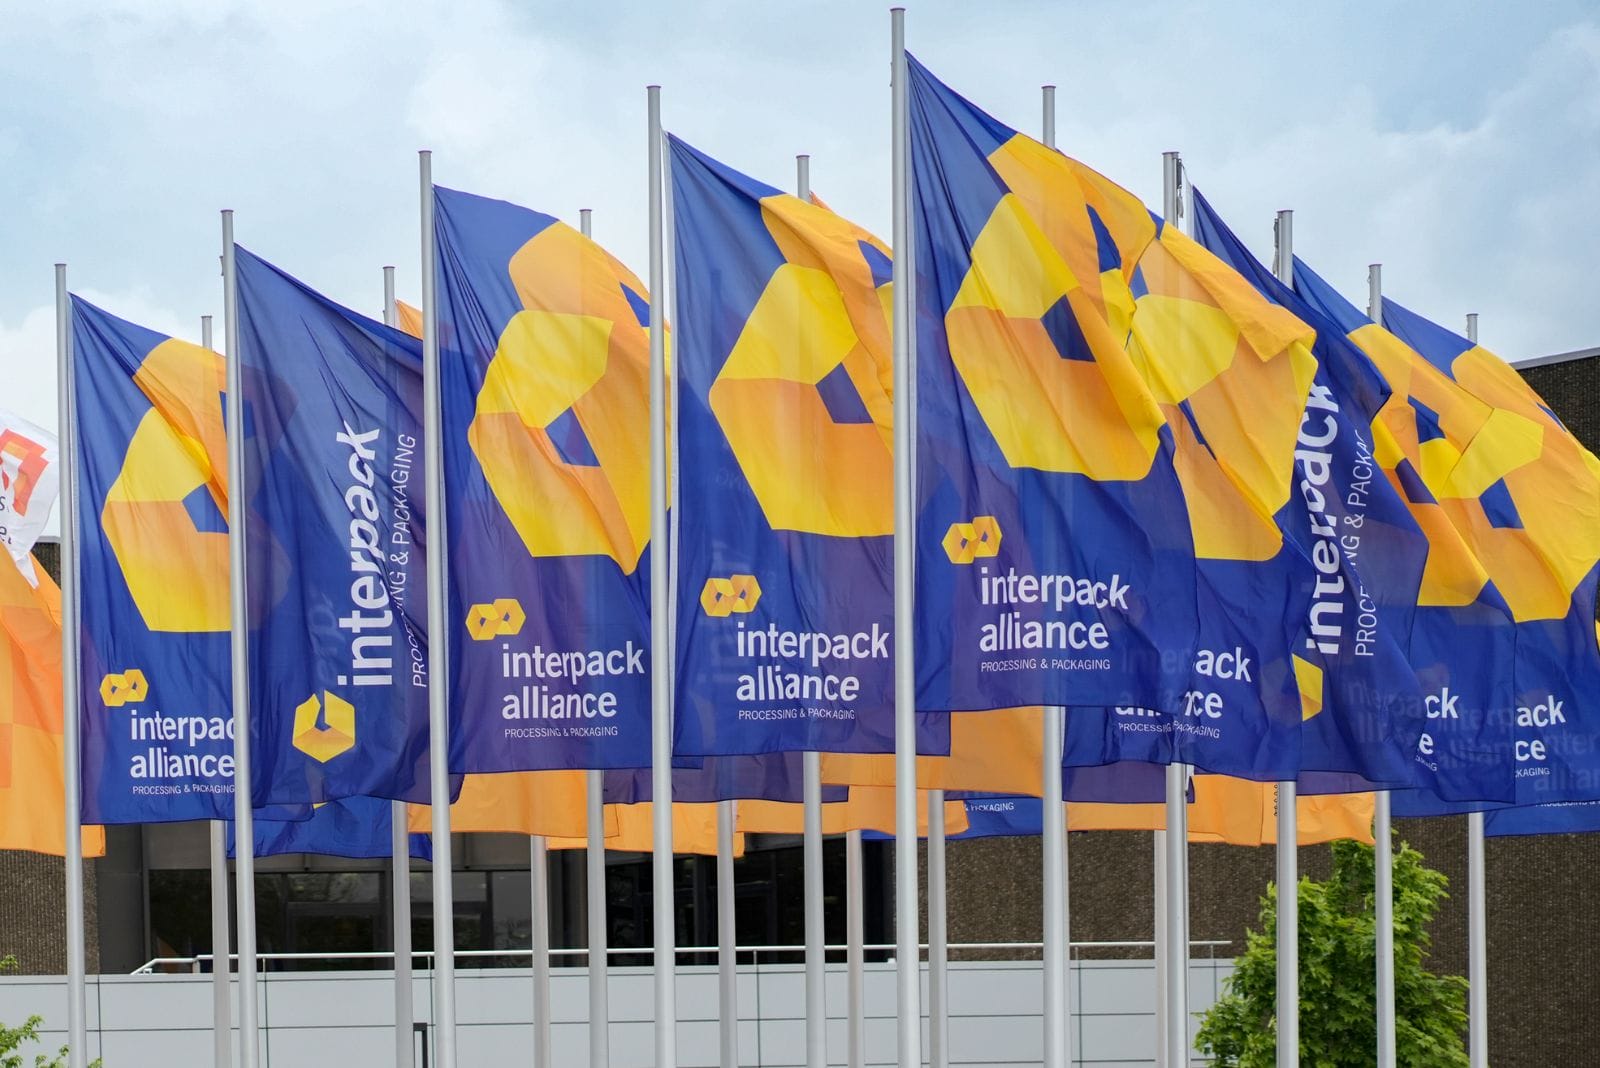 interpack flags outside of fair grounds